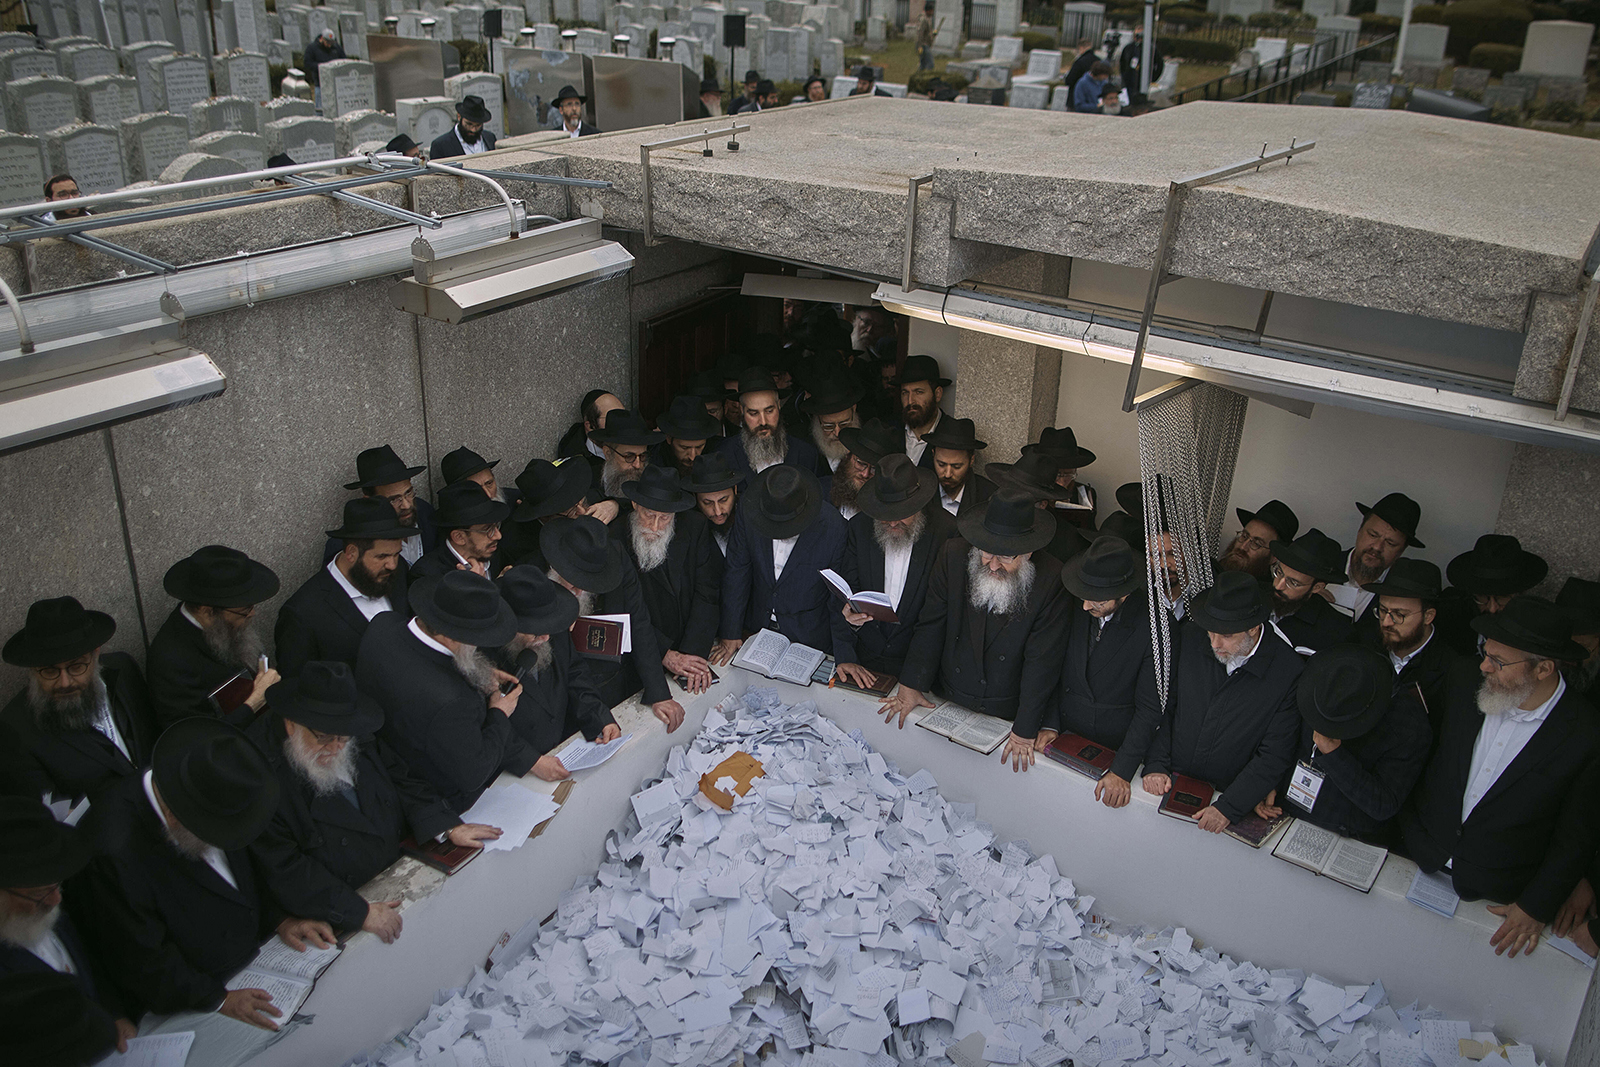 Chabad-Lubavitch rabbis pray at the resting place of the Rebbe, Rabbi Menachem Mendel Schneerson, at Montefiore Cemetery on Friday, Nov. 10, 2023, in the Queens borough of New York. This year's conference focuses on the war between Israel and Hamas, antisemitism on college campuses and Jewish spiritual awakening following the attacks of Oct. 7. (AP Photo/Andres Kudacki)